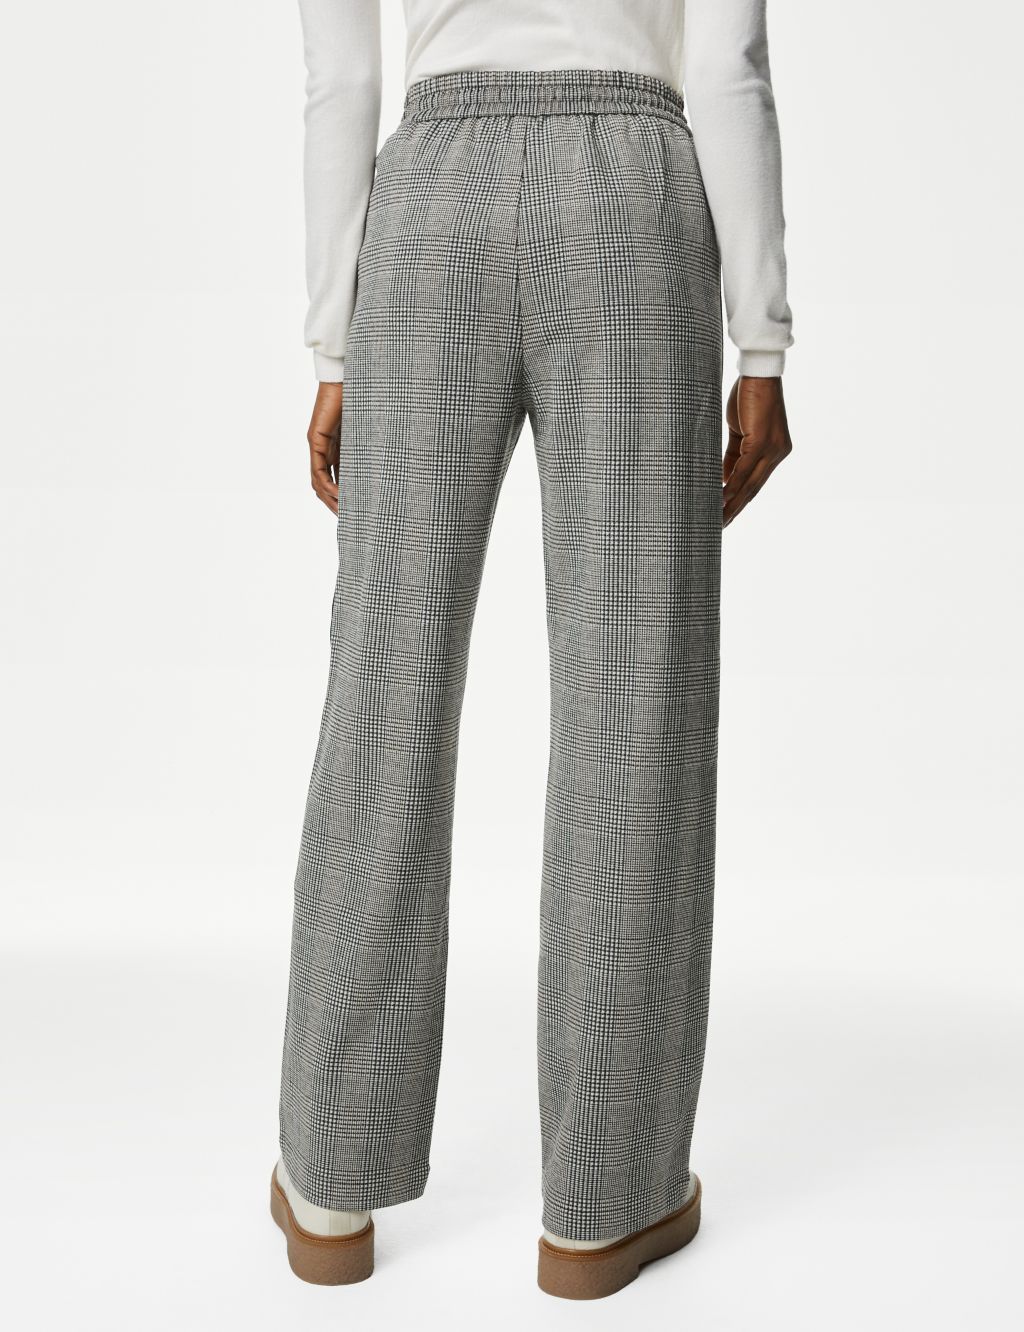 Checked Straight Leg Trousers image 5